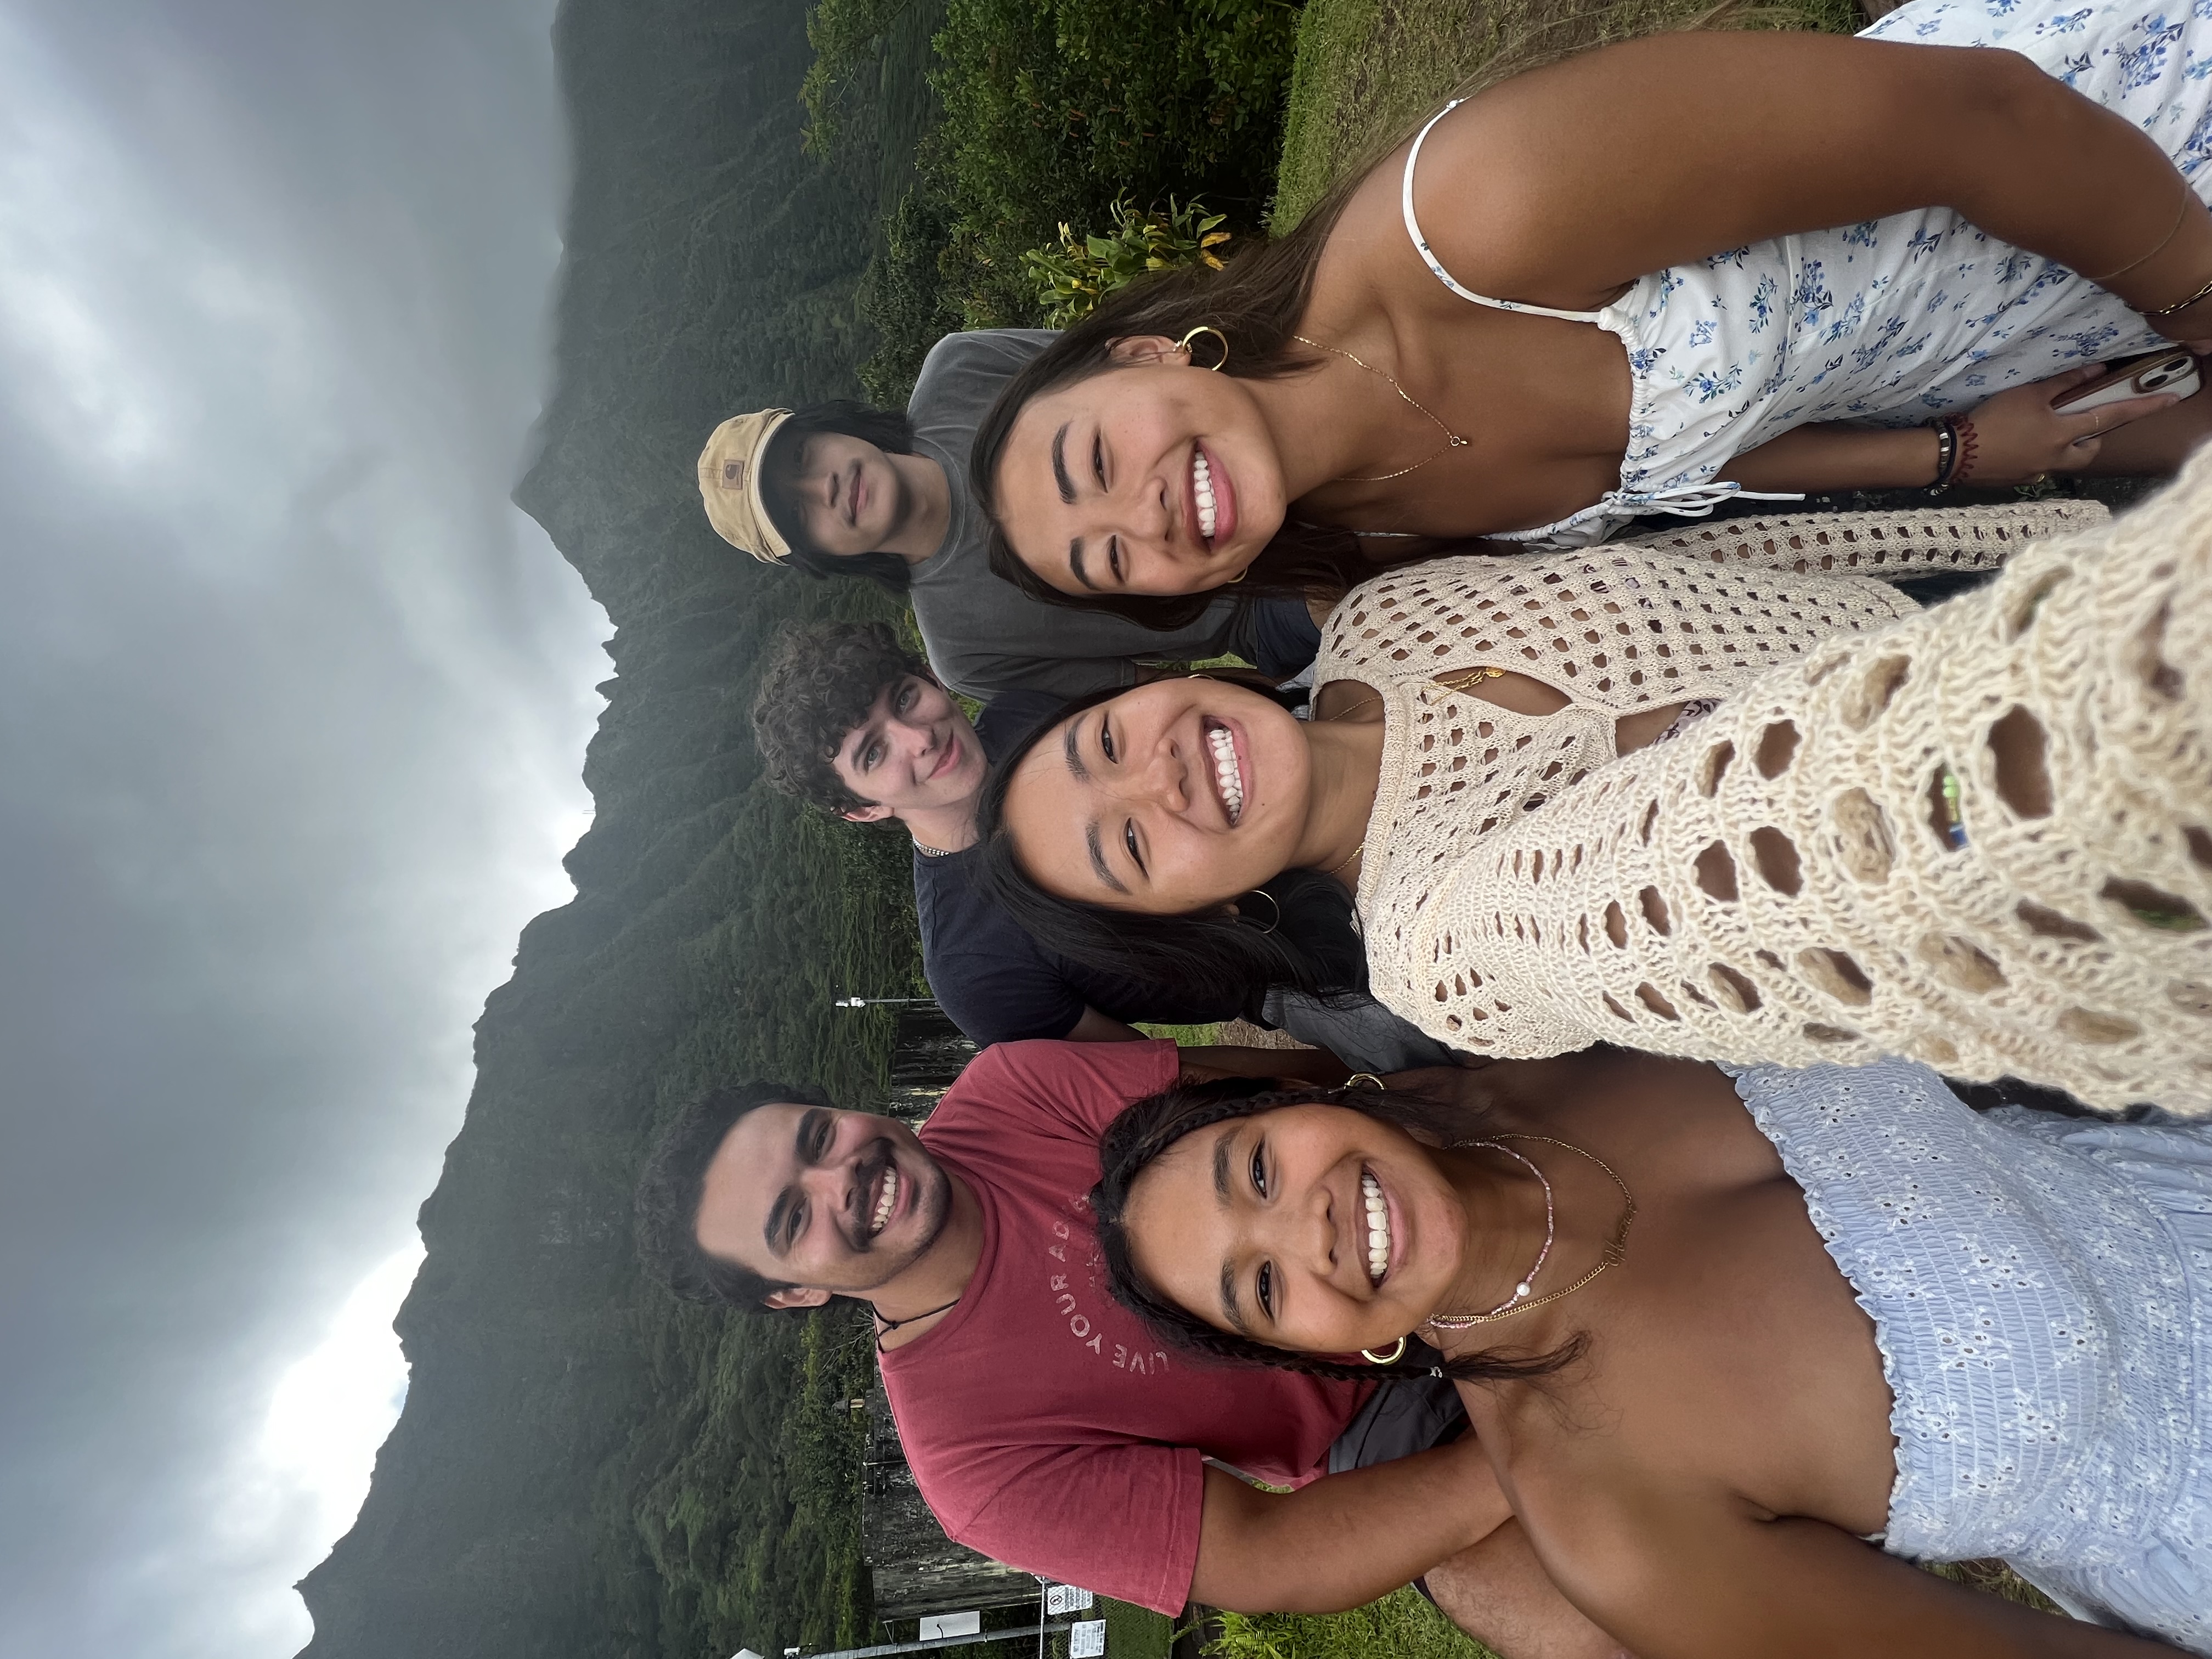 Image shows a group of students posing in a "selfie" style. There are mountains in the background against a cloudy sky.